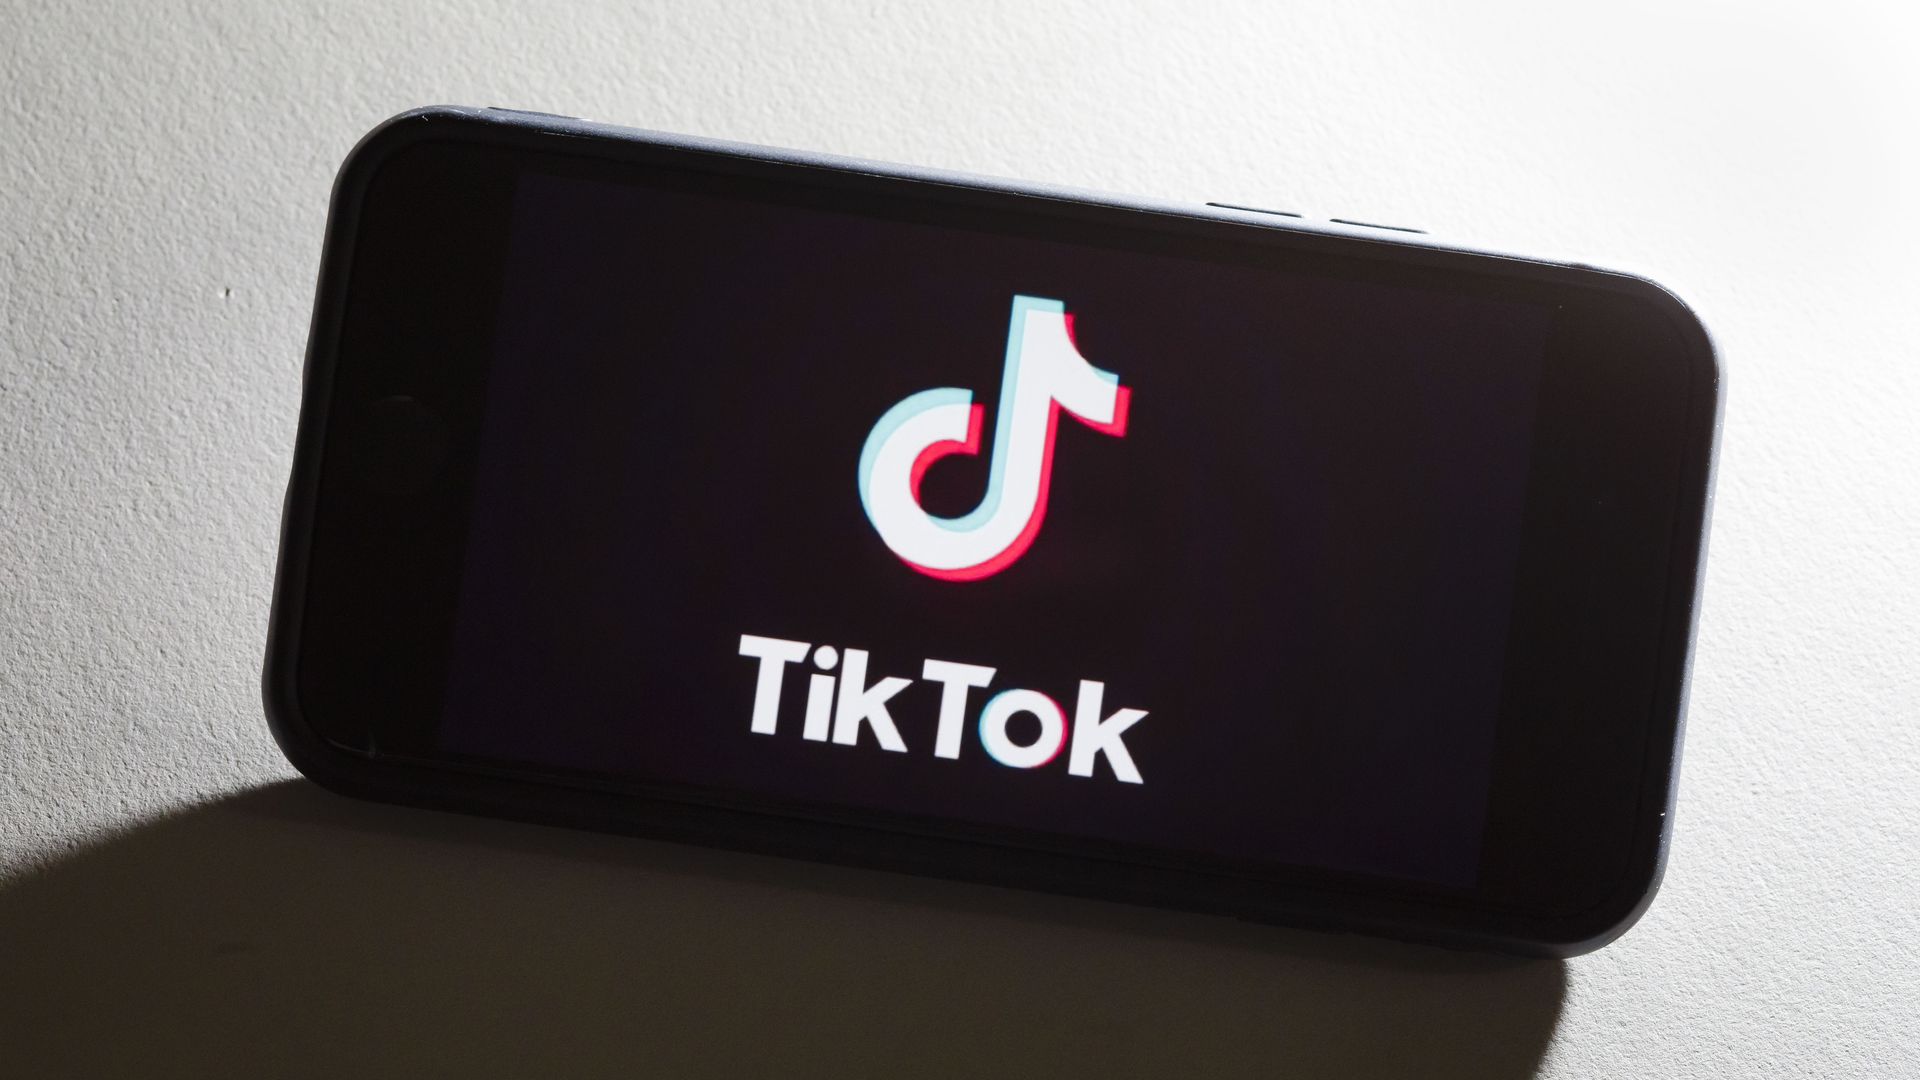 A picture of the TikTok app open on a phone screen.